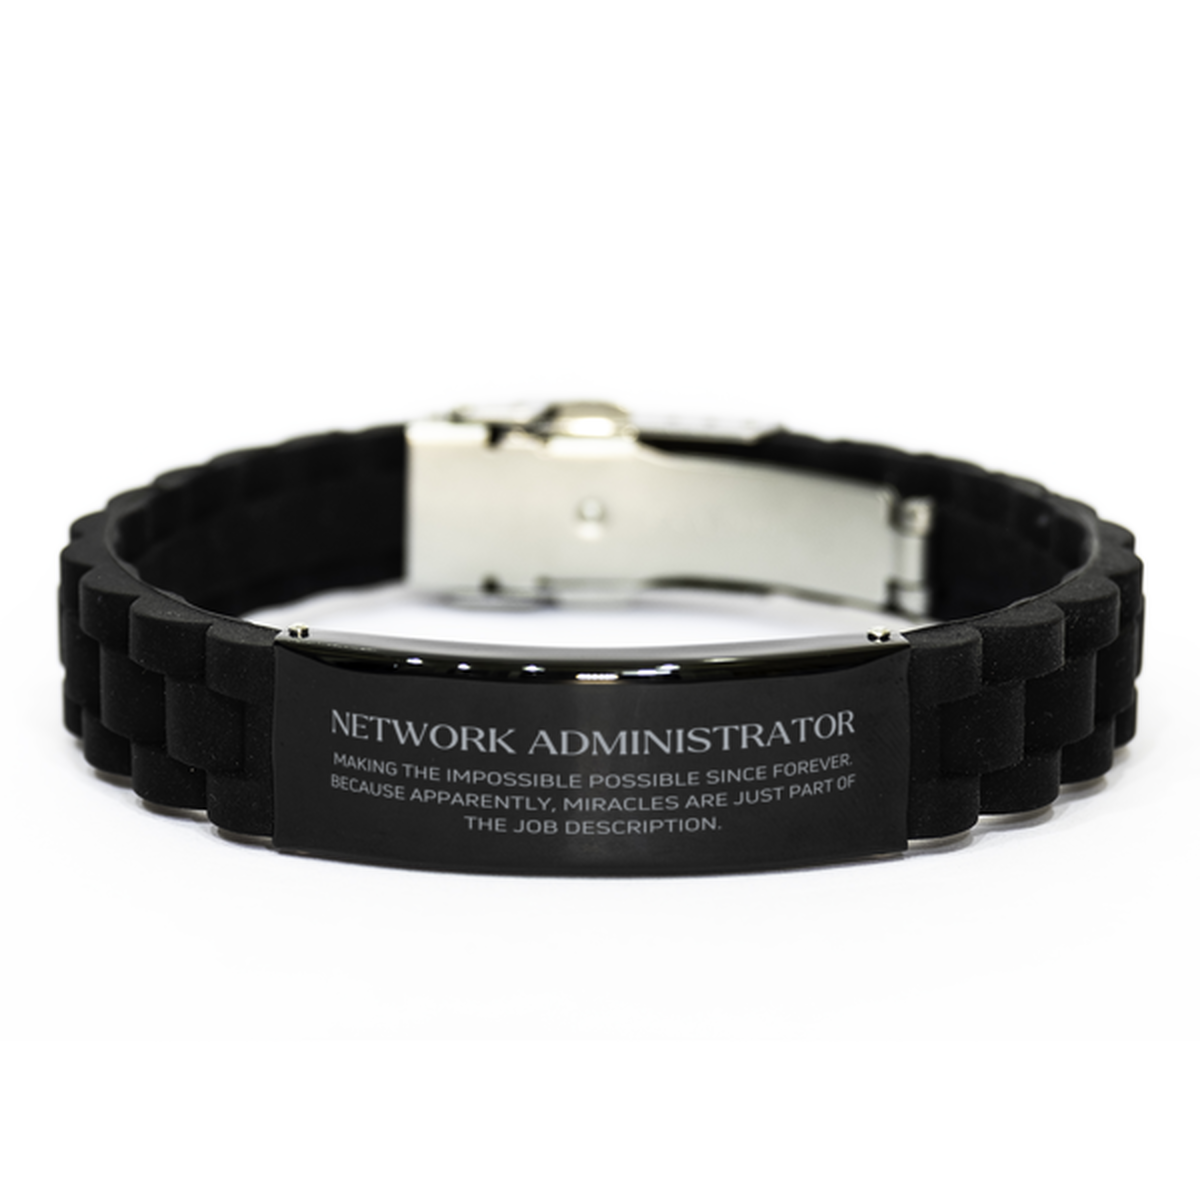 Funny Network Administrator Gifts, Miracles are just part of the job description, Inspirational Birthday Black Glidelock Clasp Bracelet For Network Administrator, Men, Women, Coworkers, Friends, Boss